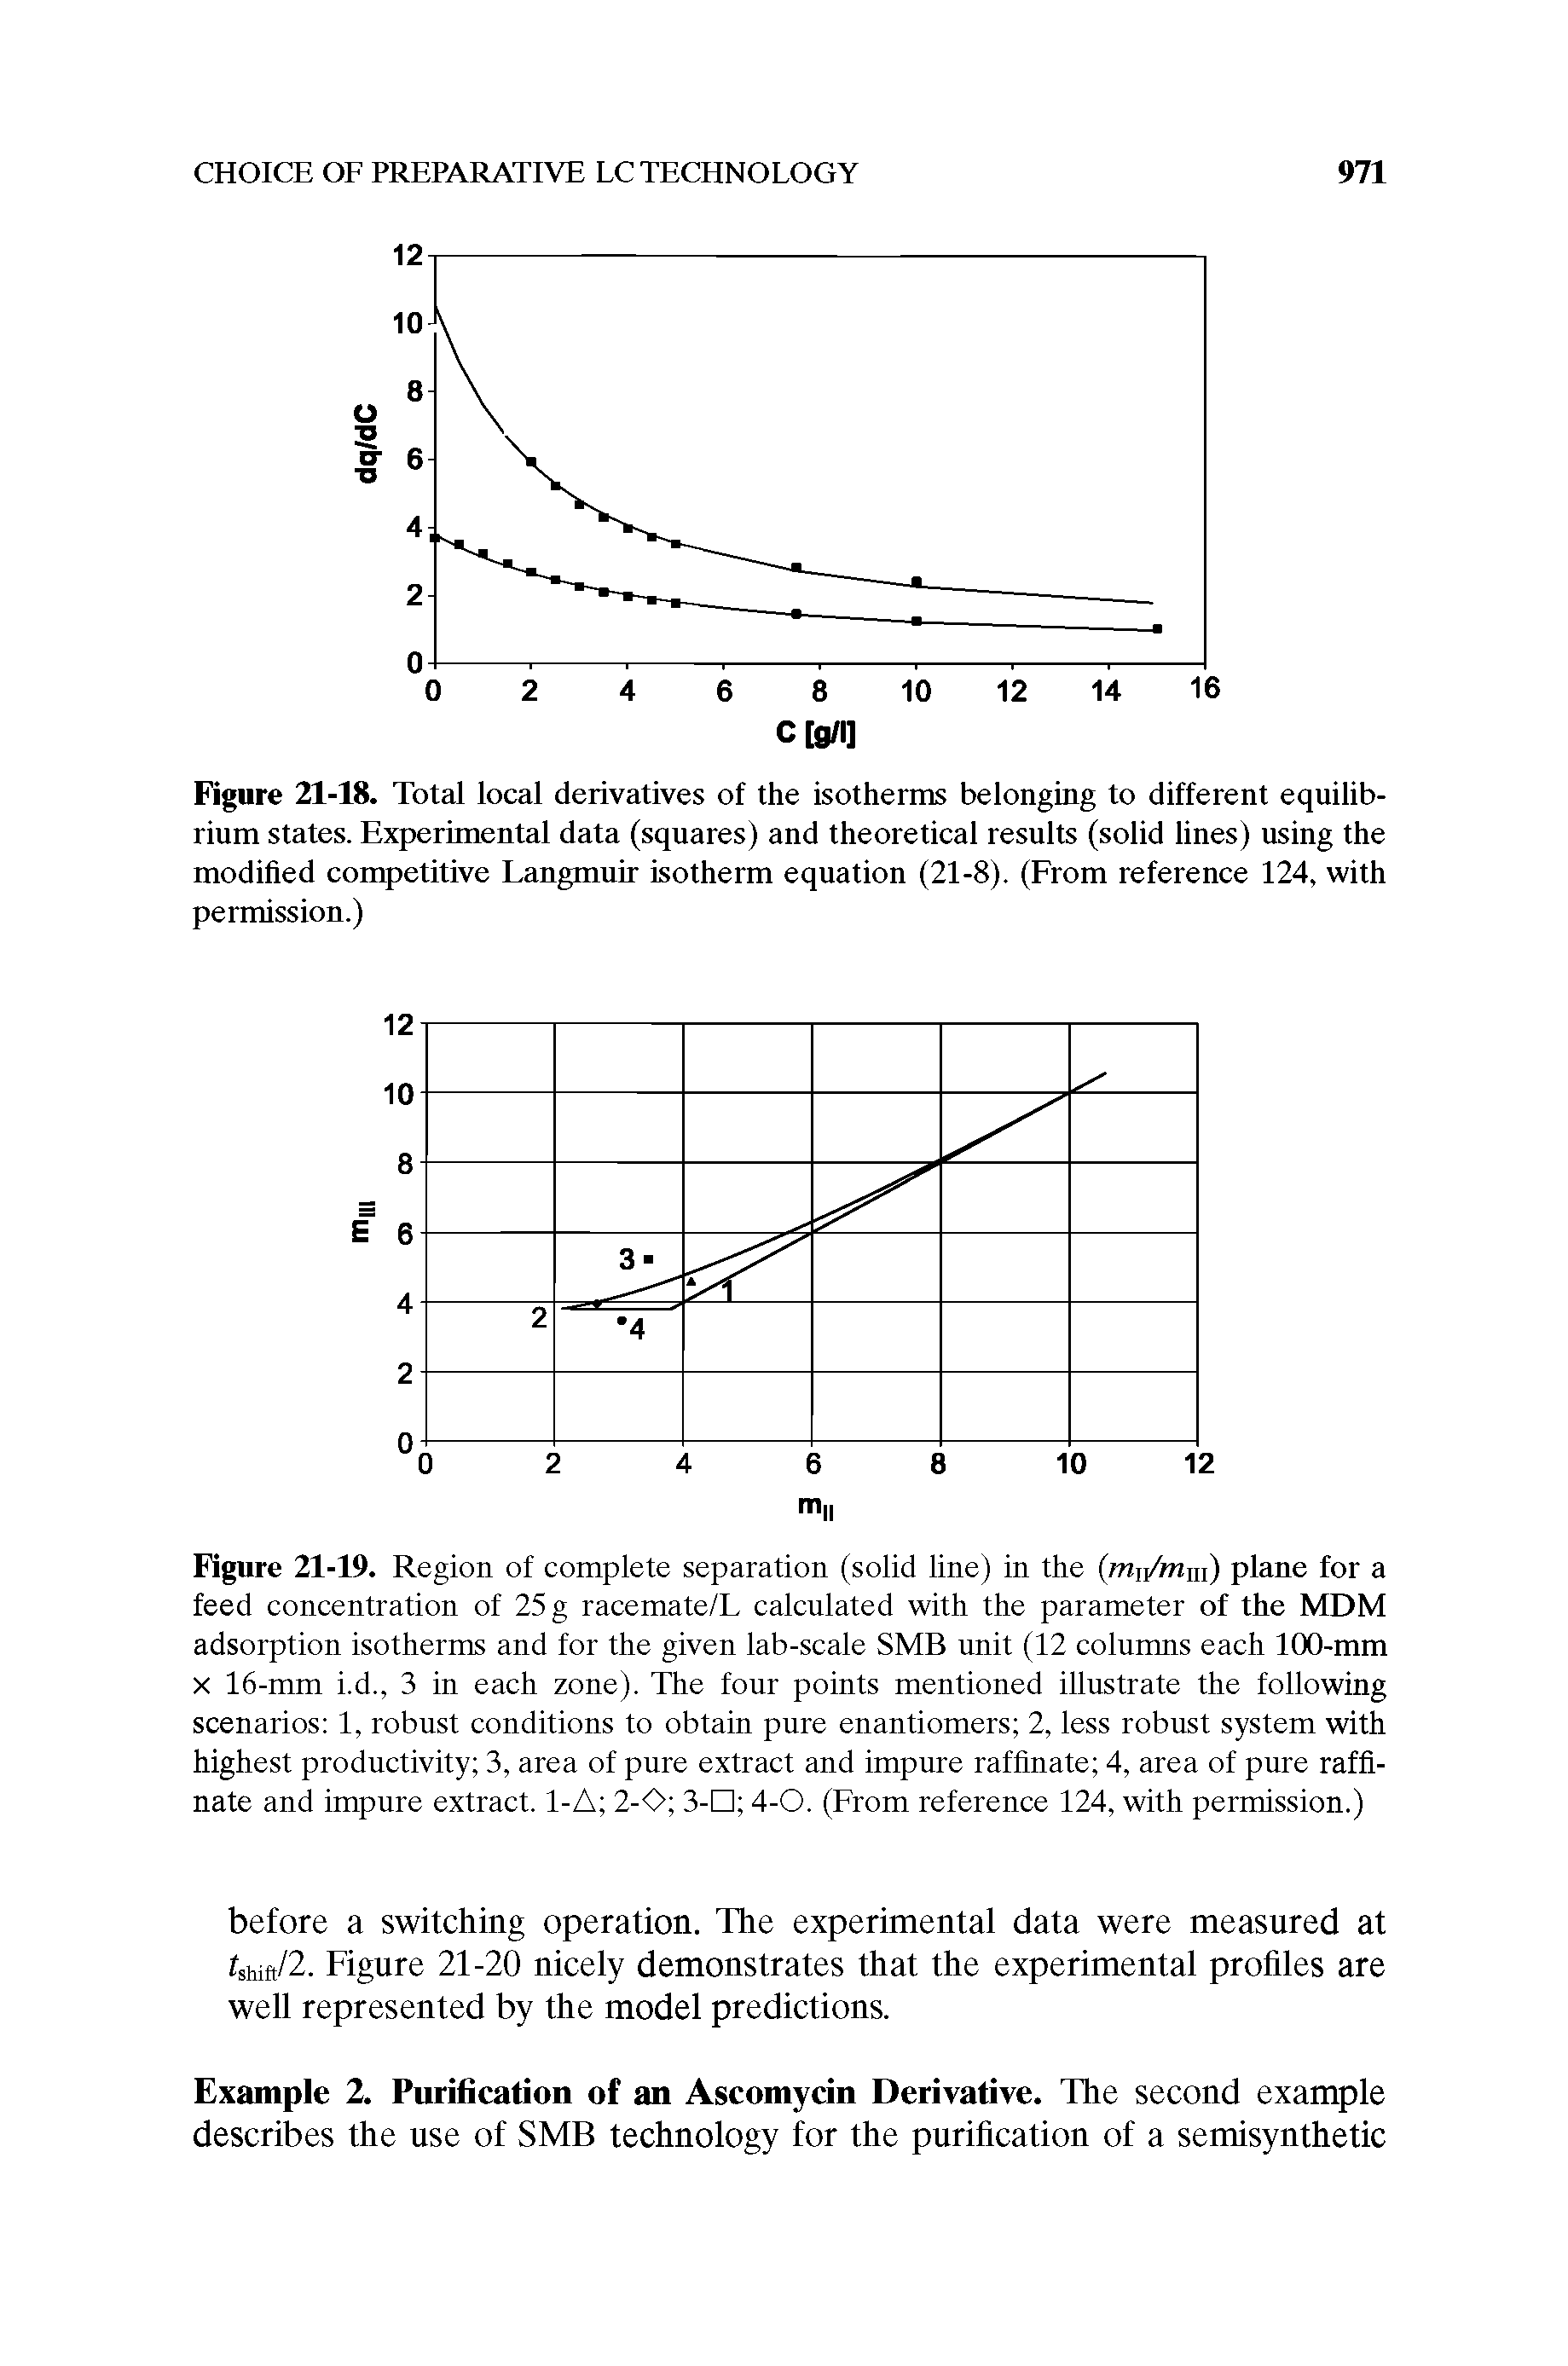 Figure 21-19. Region of complete separation (solid line) in the (mj/mm) plane for a feed concentration of 25 g racemate/L calculated with the parameter of the MDM adsorption isotherms and for the given lab-scale SMB unit (12 columns each 100-mm X 16-mm i.d., 3 in each zone). The four points mentioned illustrate the following scenarios 1, robust conditions to obtain pure enantiomers 2, less robust system with highest productivity 3, area of pure extract and impure raffinate 4, area of pure raffinate and impure extract. 1-A 2-0 3-D 4-0. (From reference 124, with permission.)...